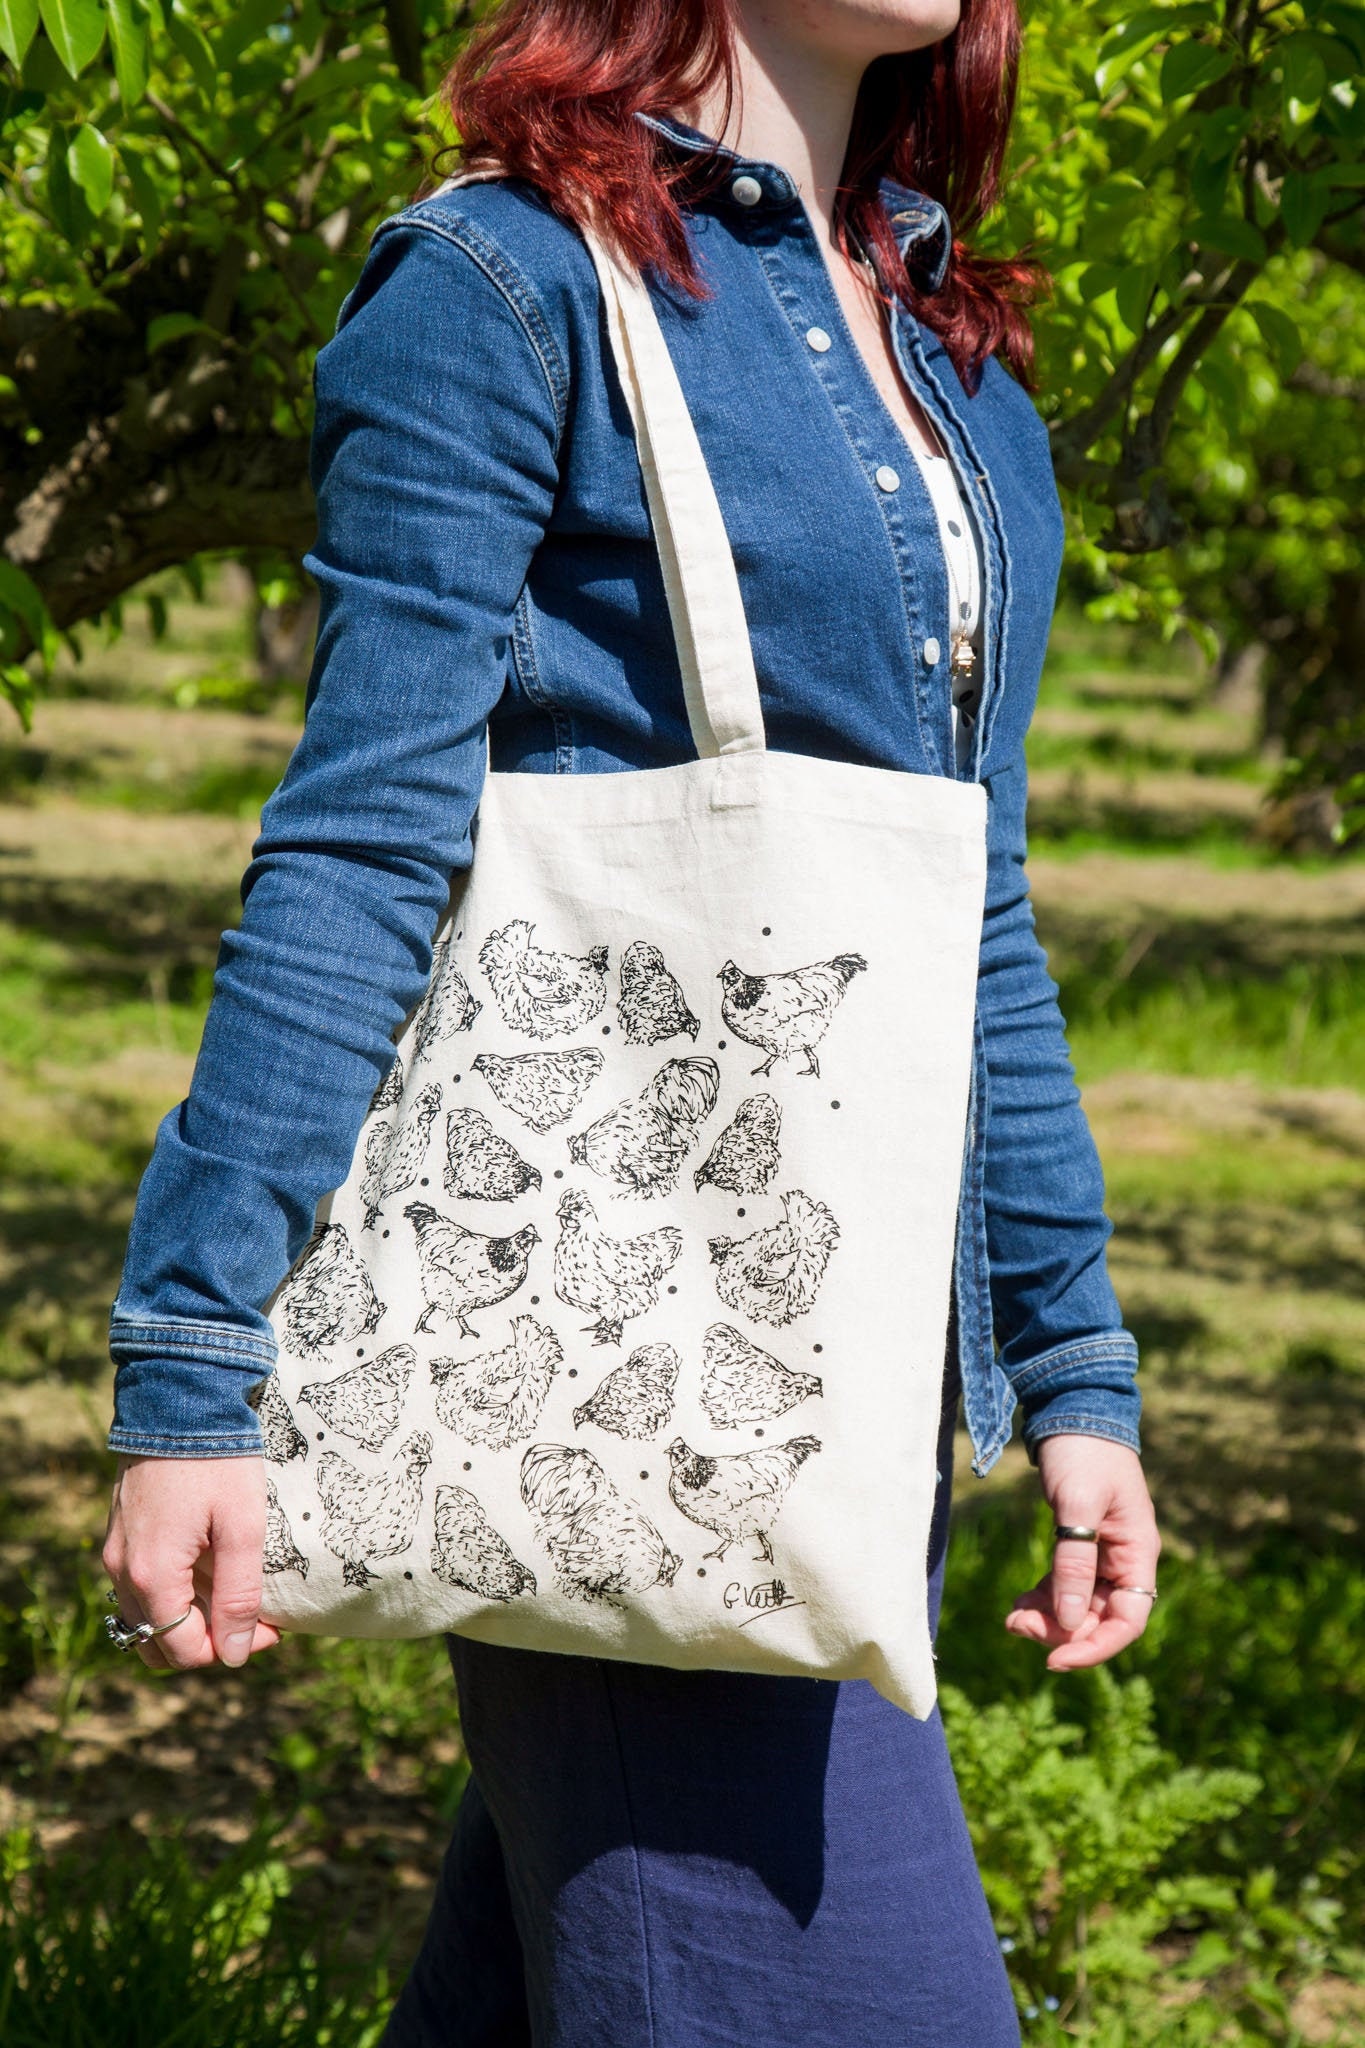 Cotton tote Shopping Bag For Life Tote bag with Printed I Love Chickens 